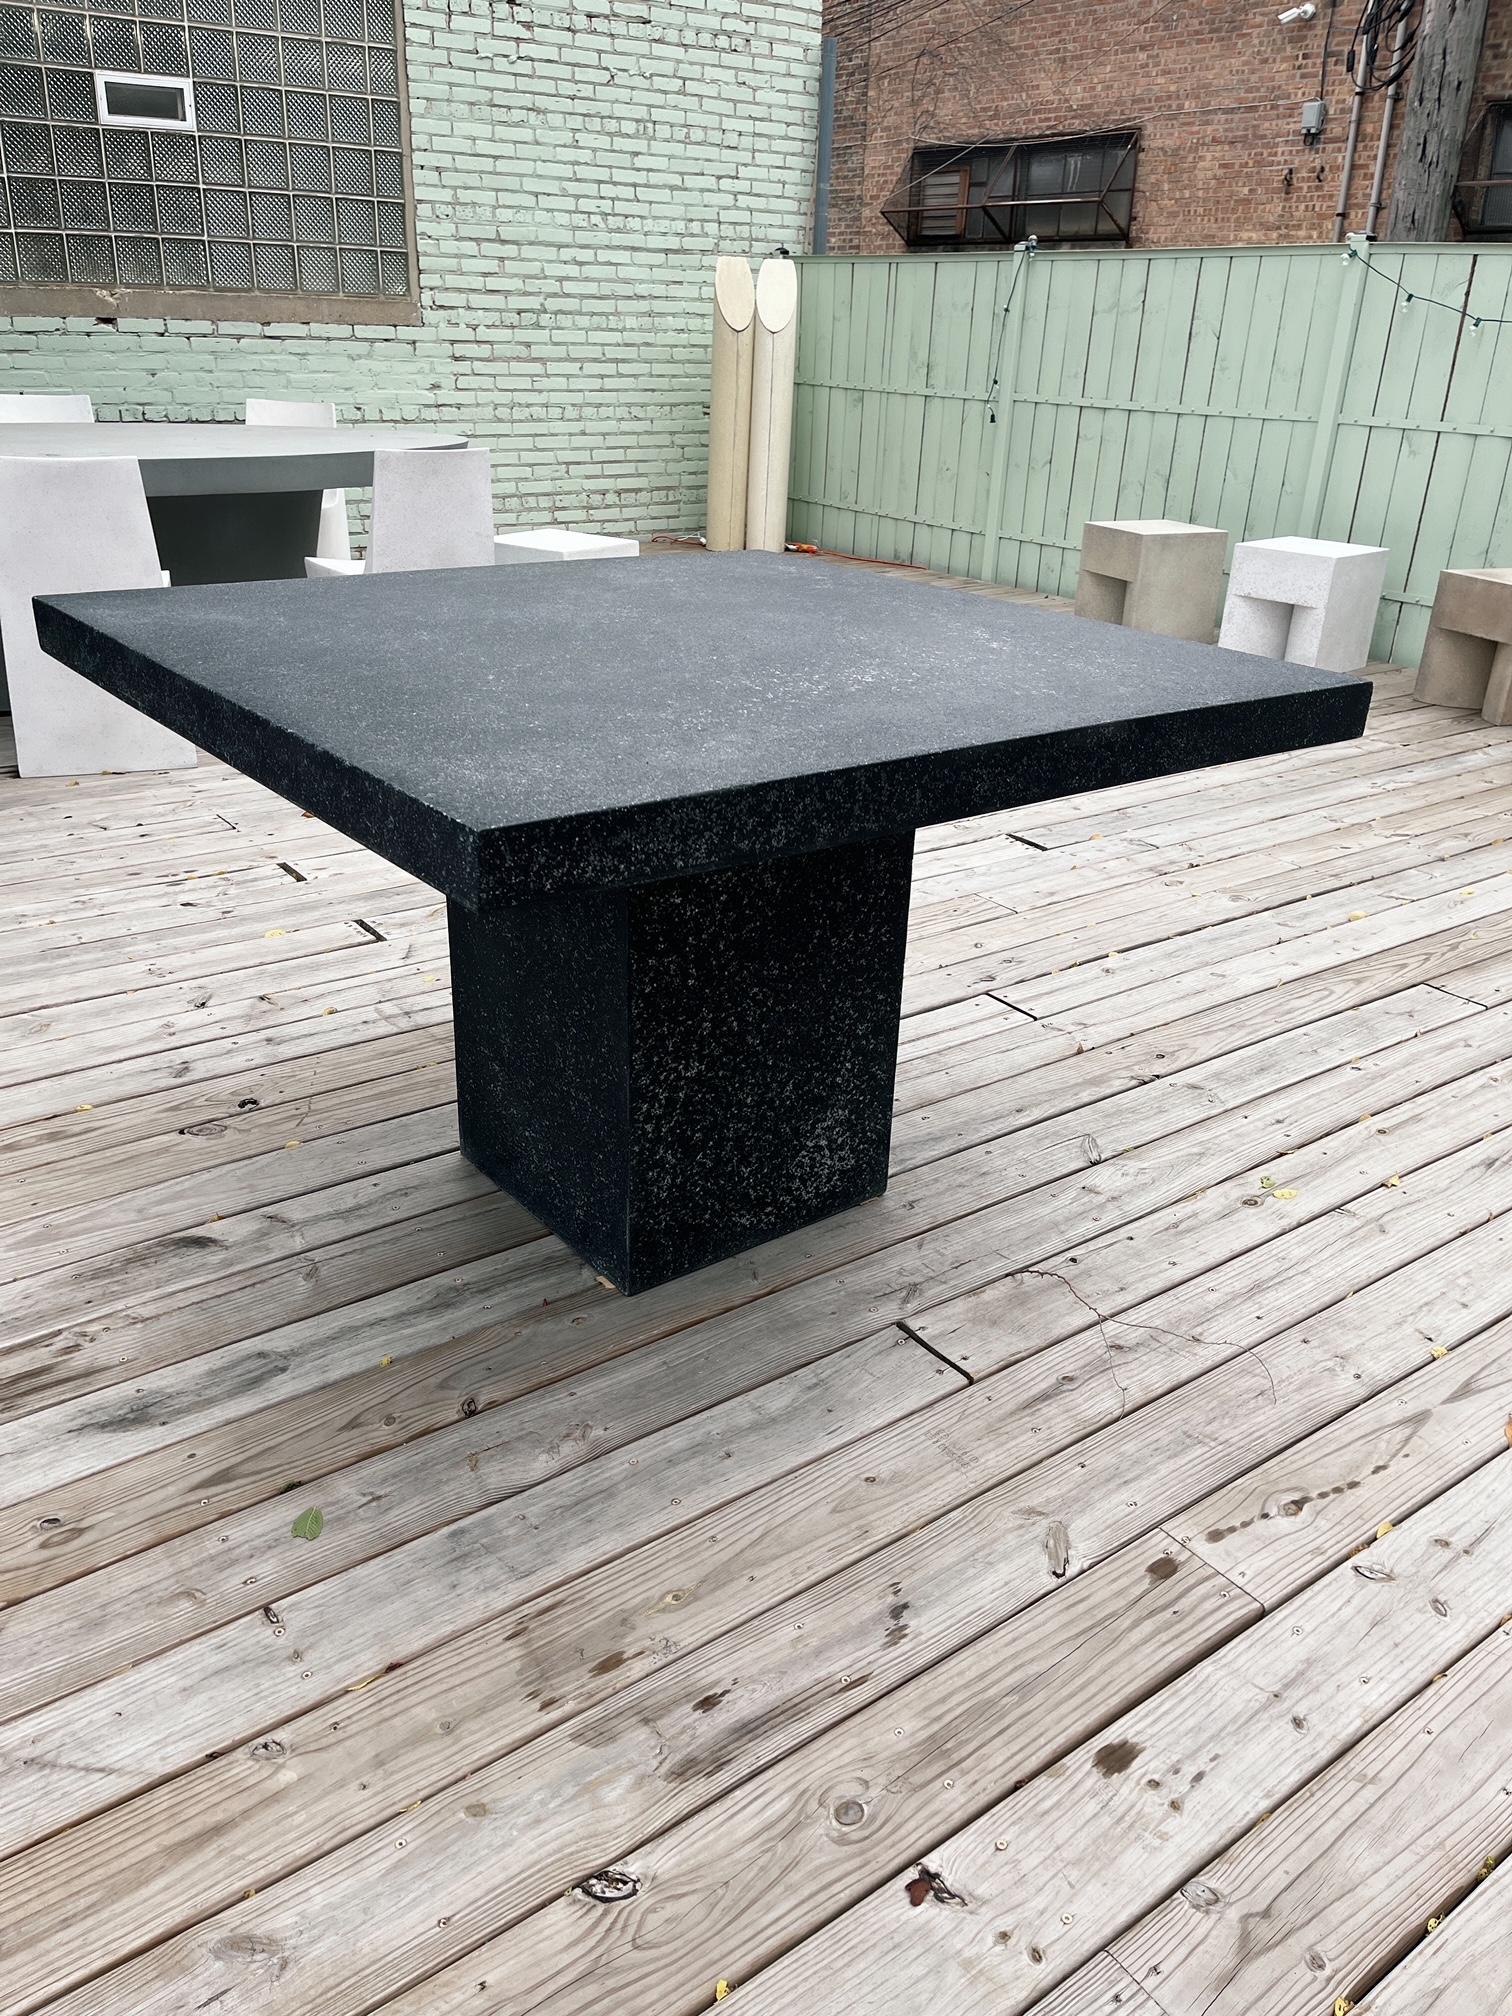 A simple, block form showcases every angle of our natural stone aggregate. 

Dimensions: Width 48 in. (122 cm), depth 48 in. (122 cm), height 30 in. (76 cm). Weight 80 lbs. (36 kg)

Finish color options:
white stone
natural stone
aged